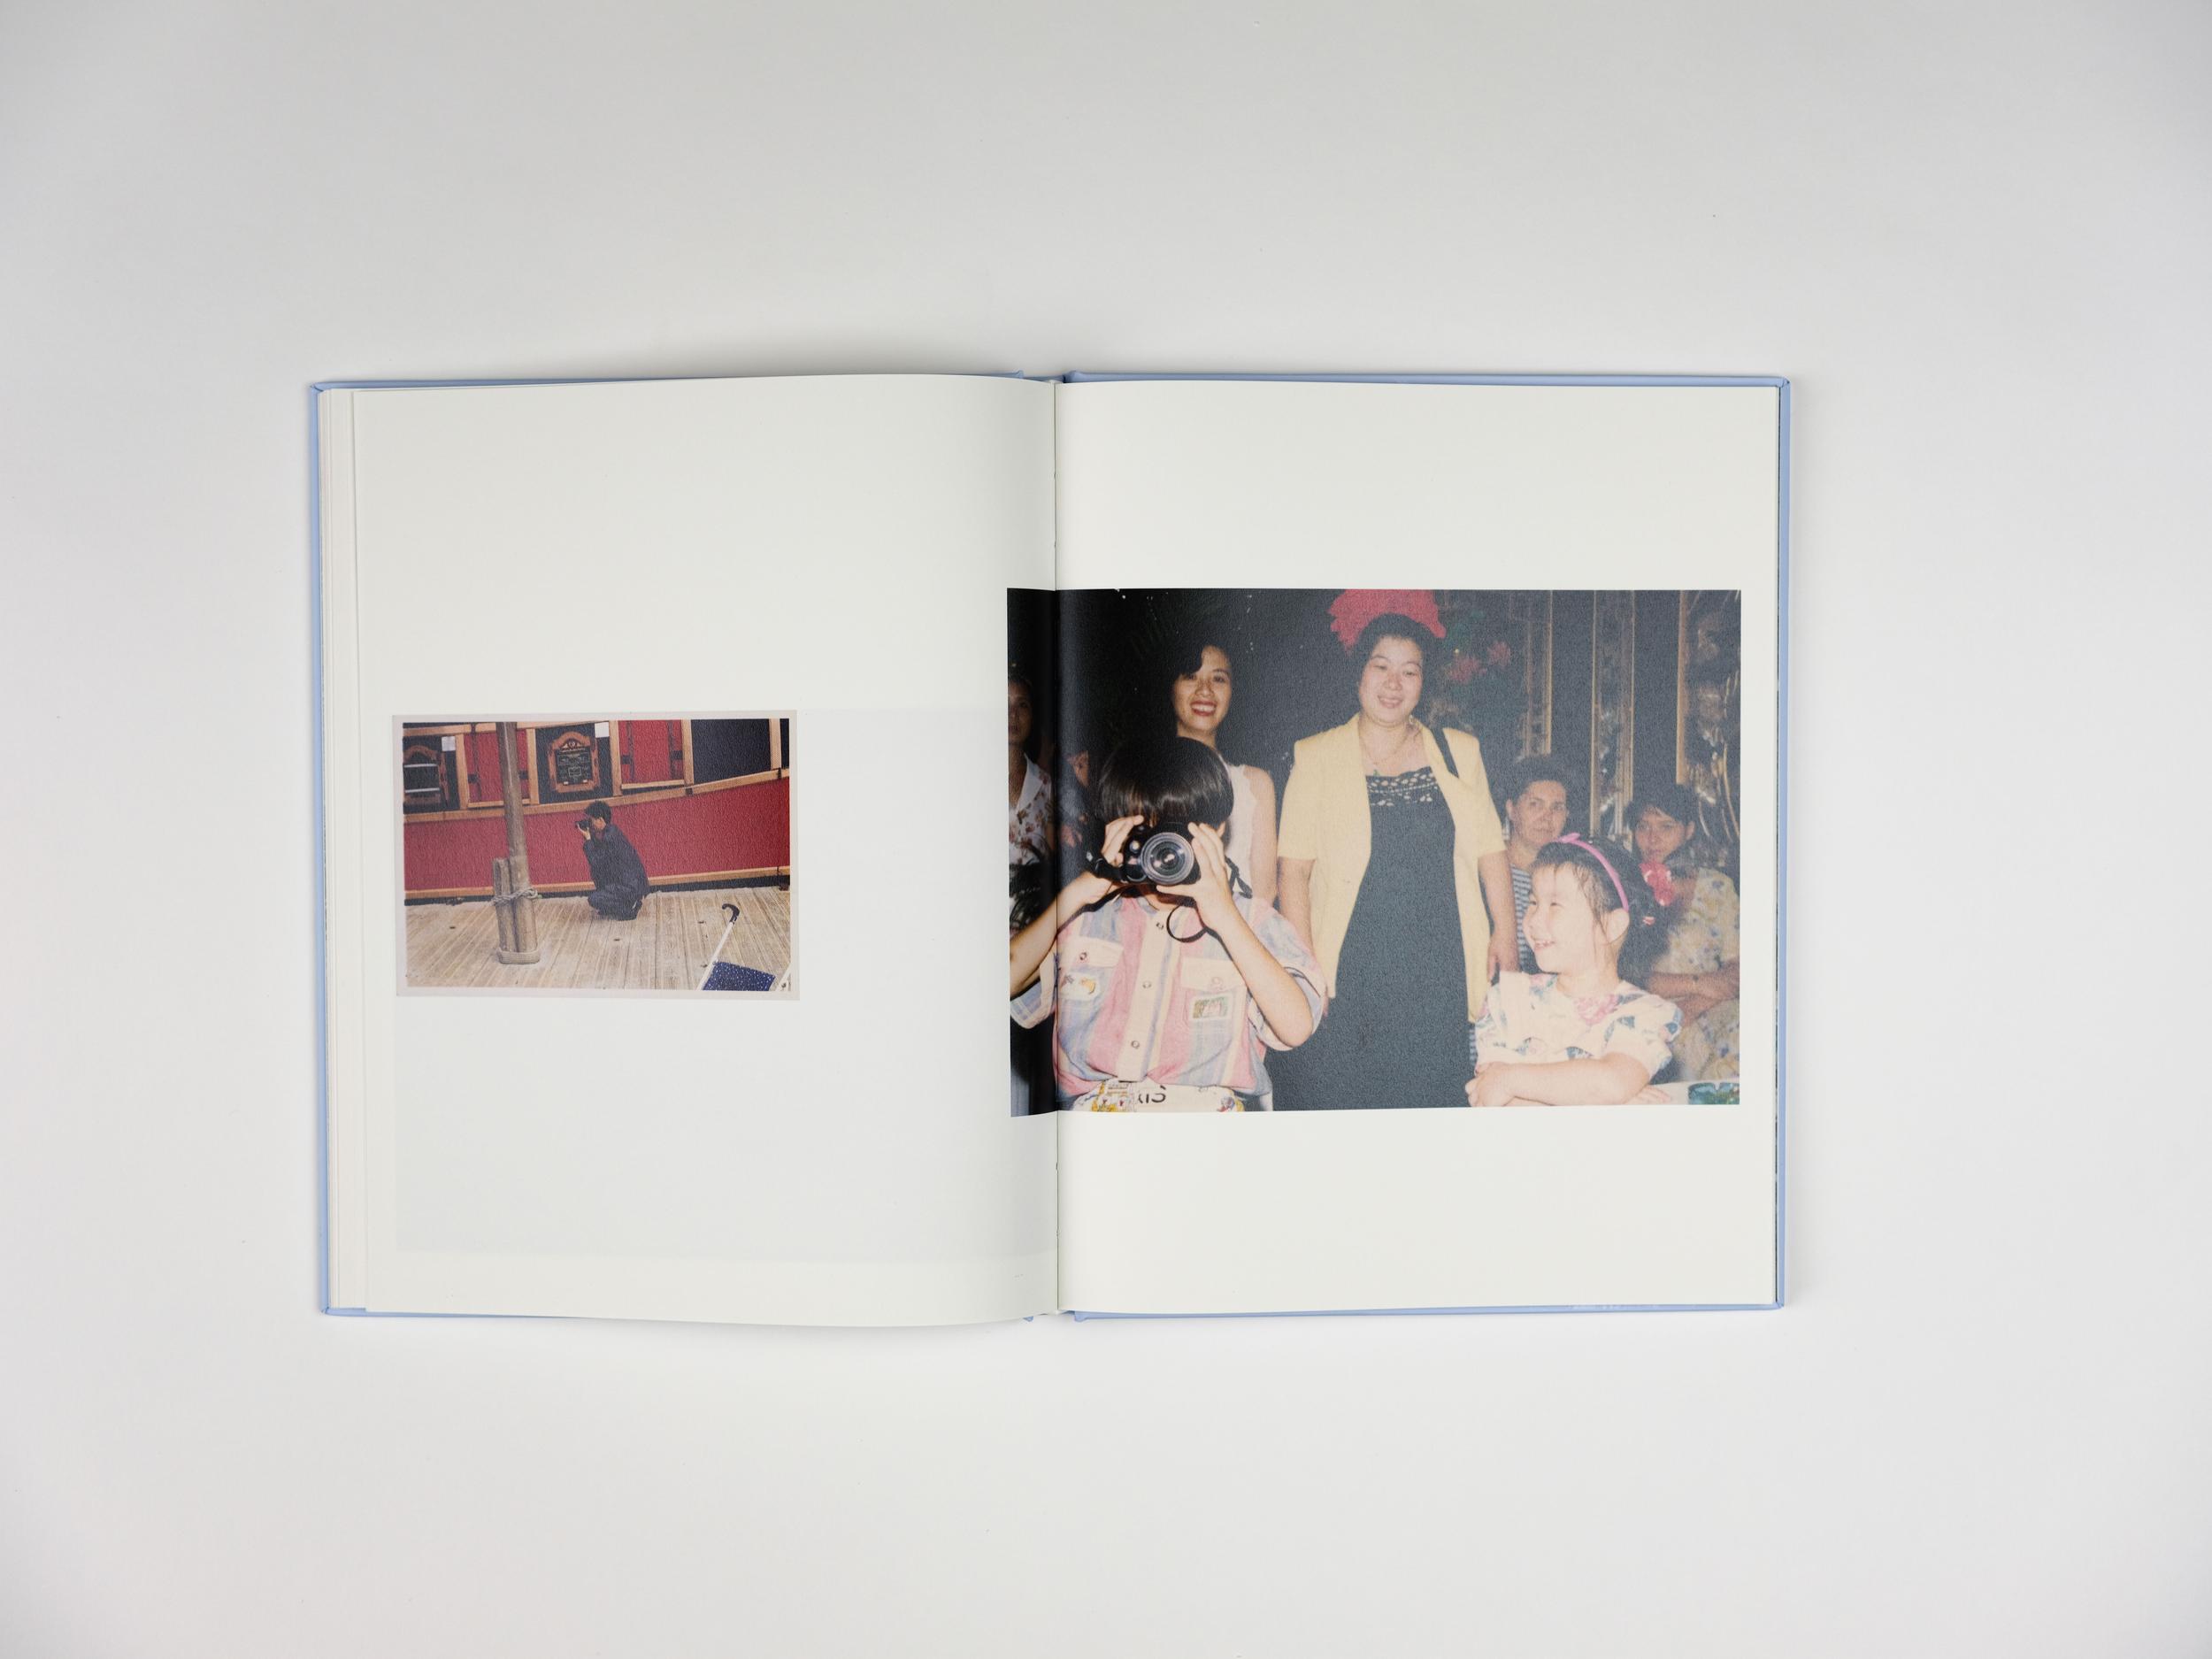 william zou soliloquy book photography of china F0553 - Soliloquy BOOK |  - Soliloquy - William Zou